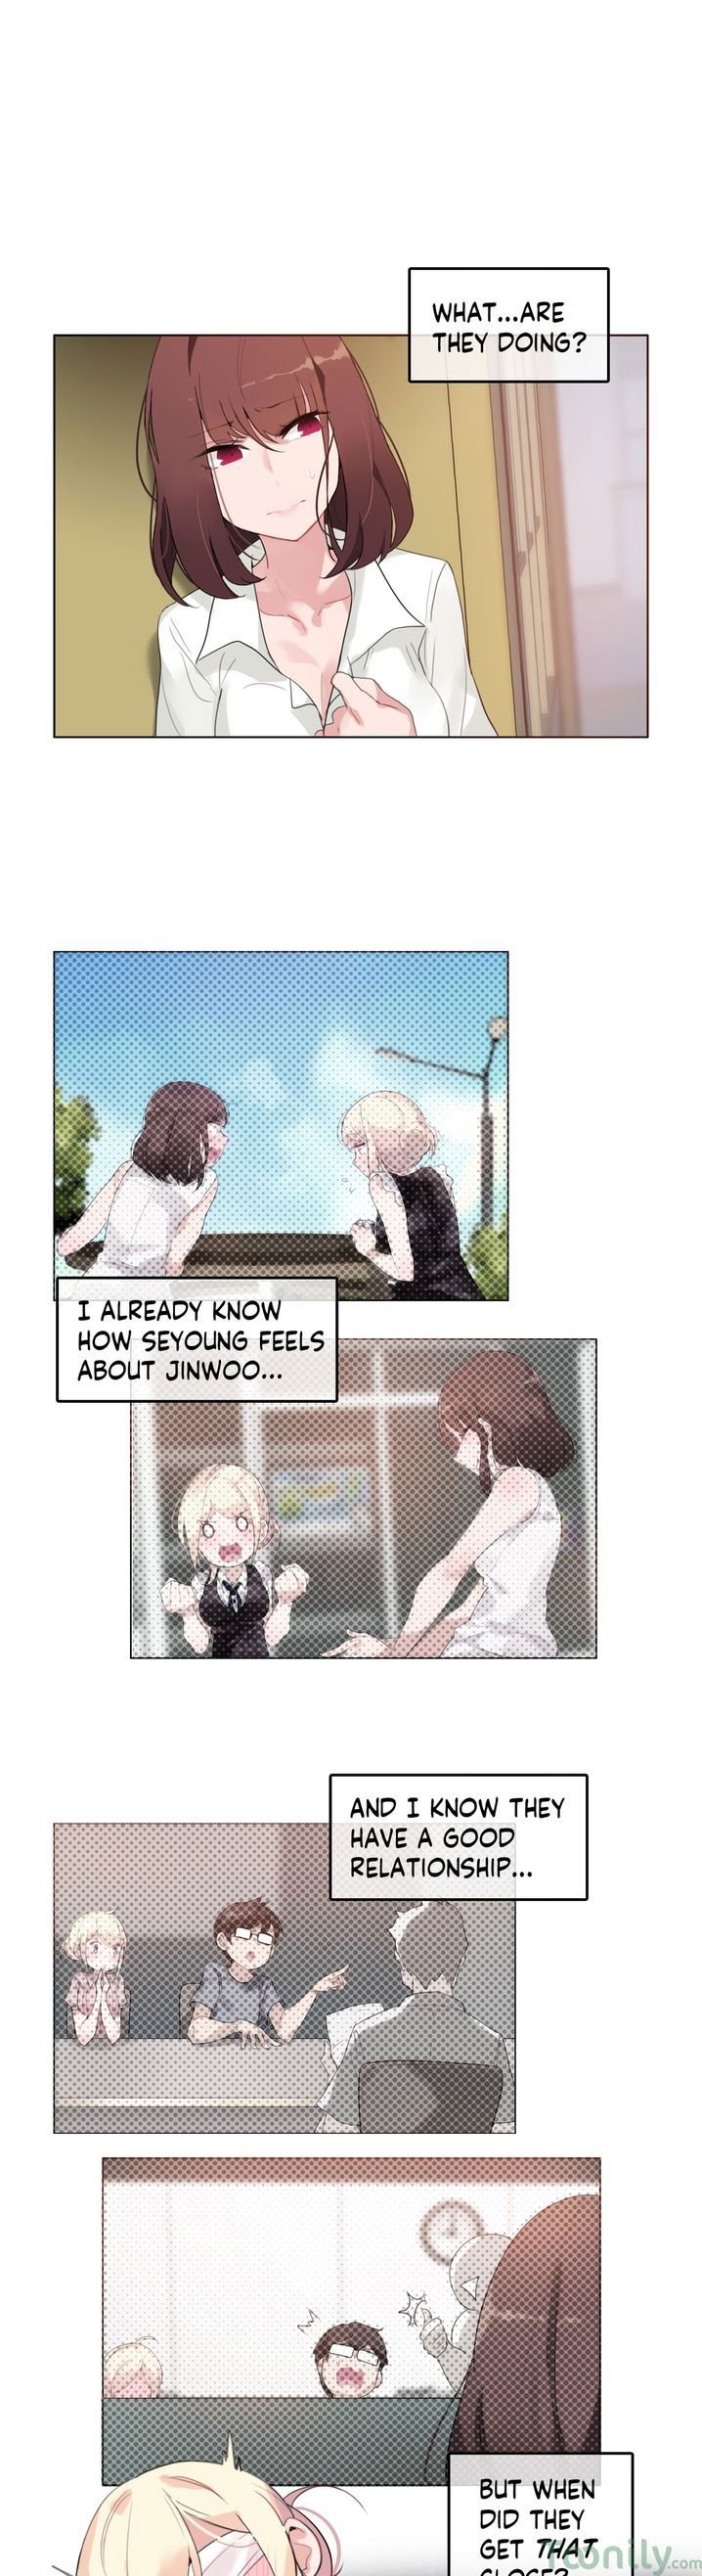 a-perverts-daily-life-chap-25-0